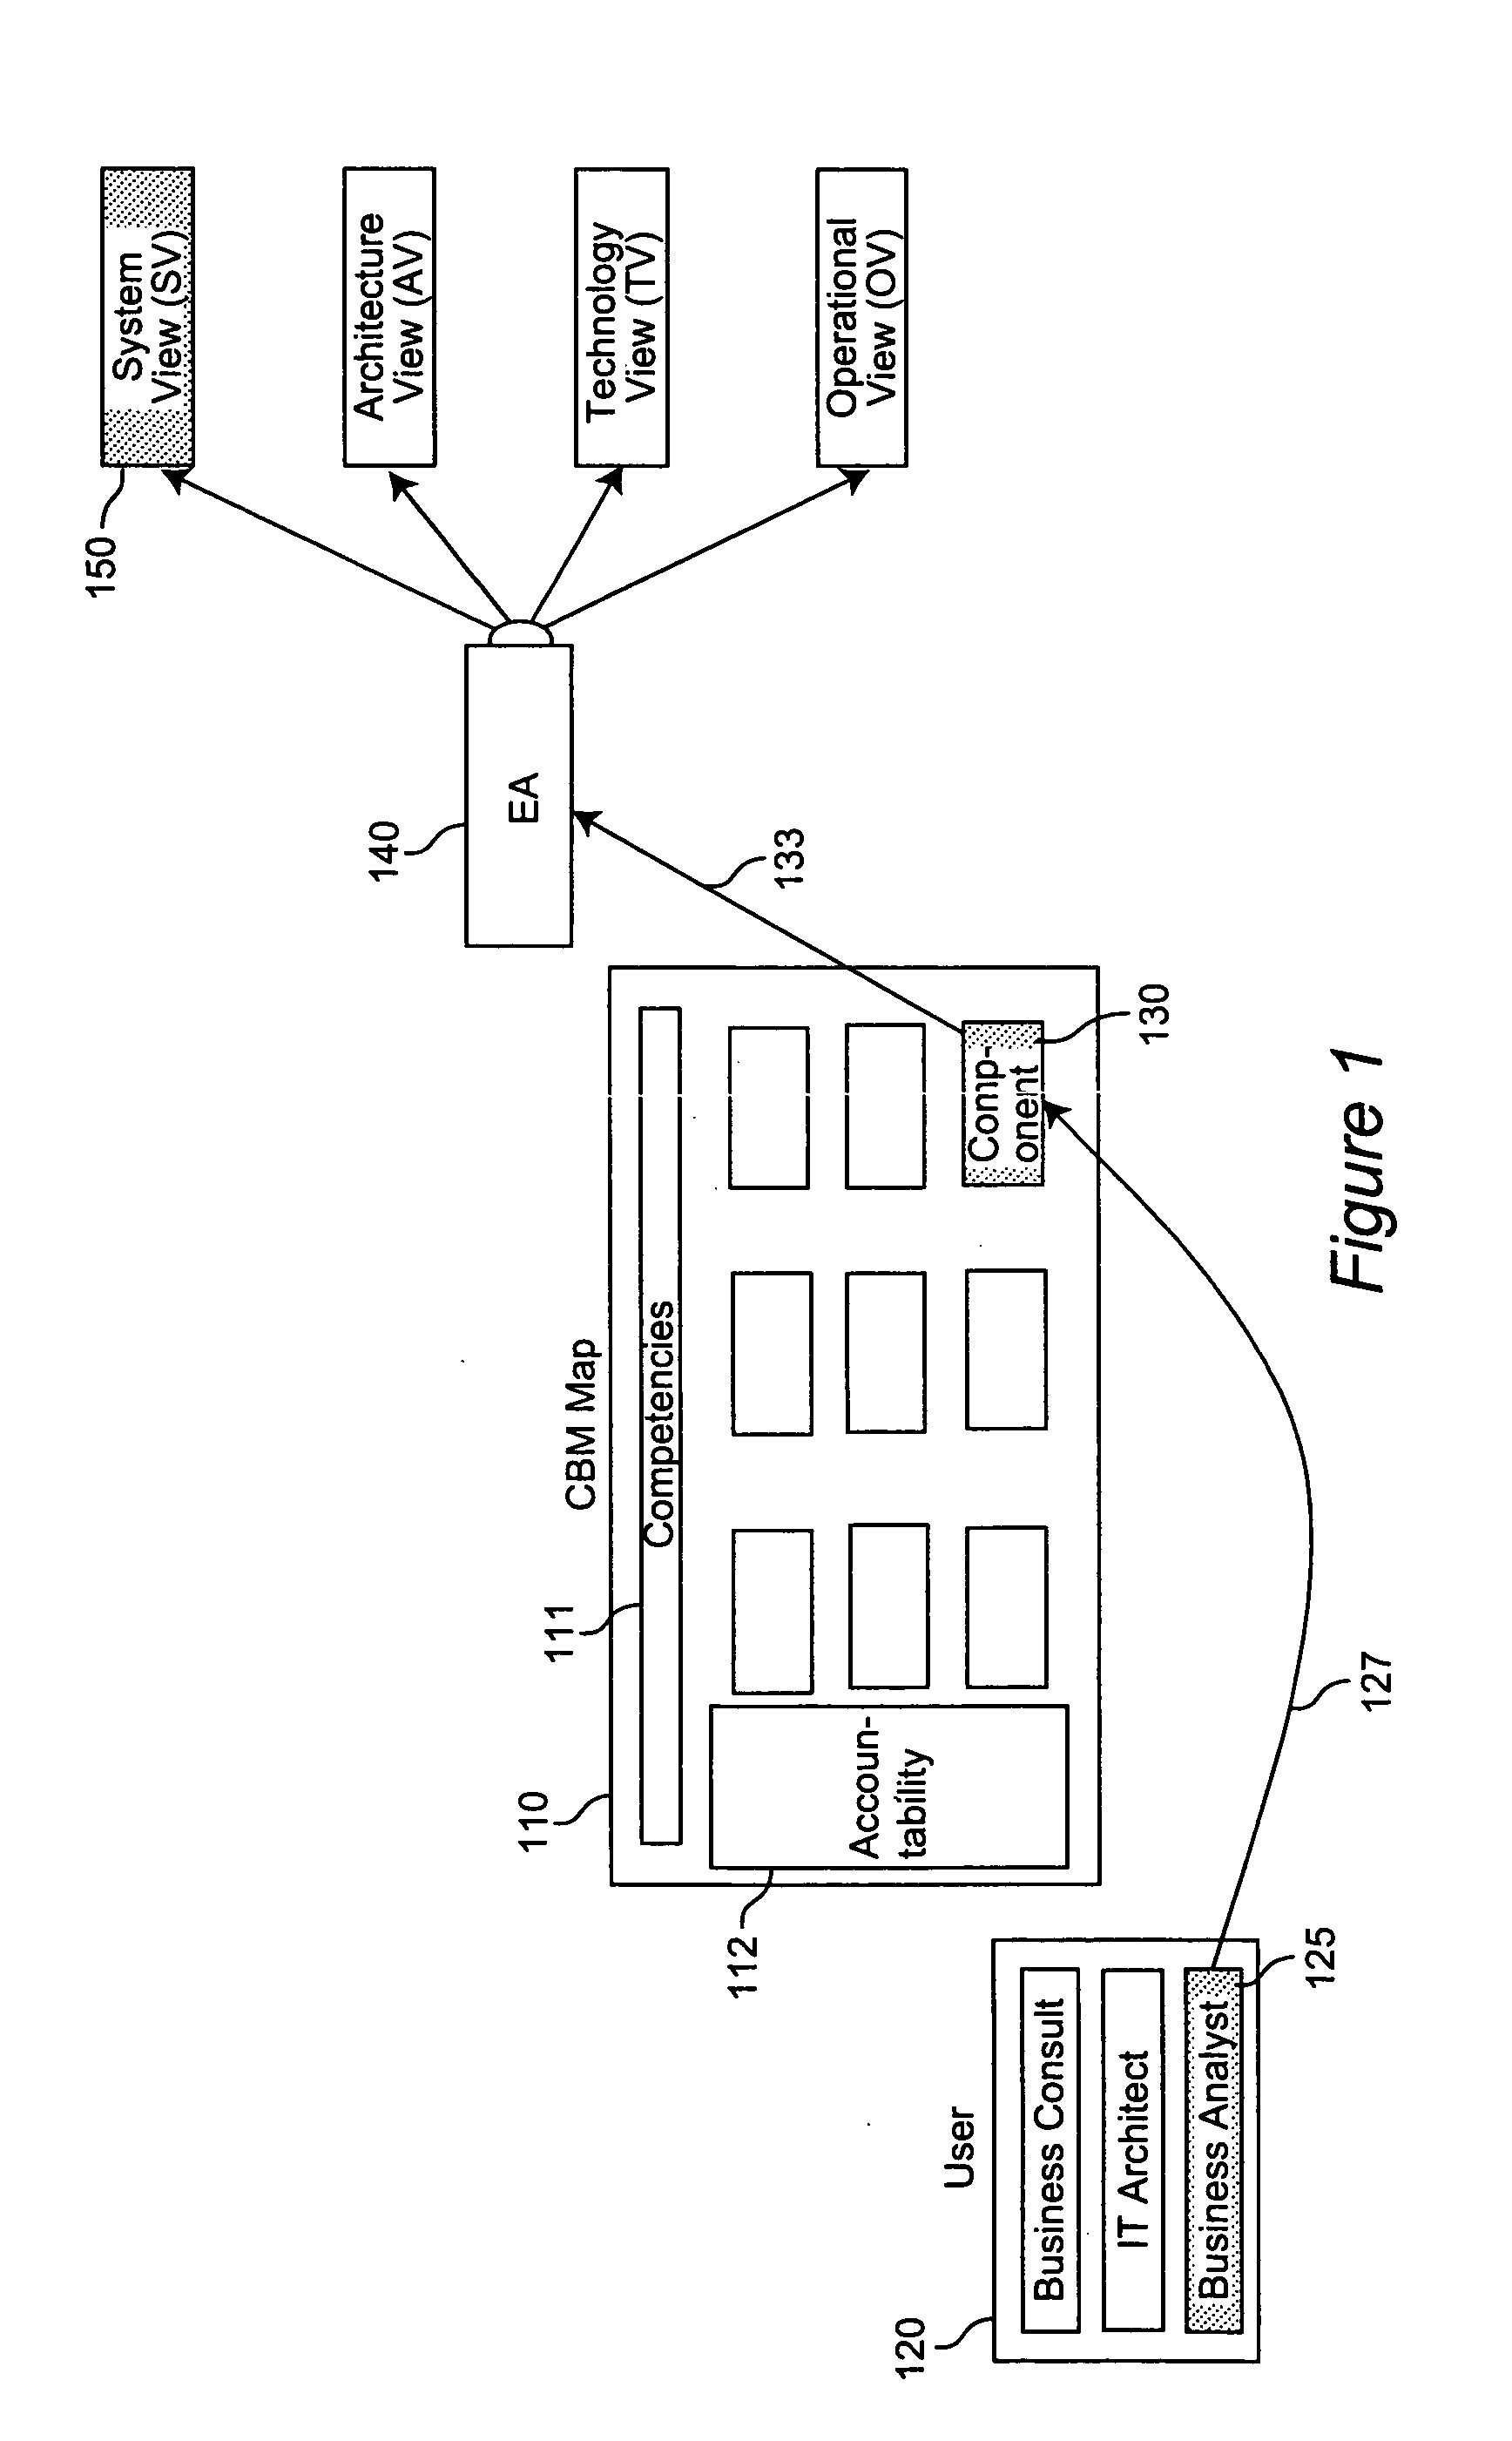 Method and system for constructing, managing and using enterprise architecture in a component busines model